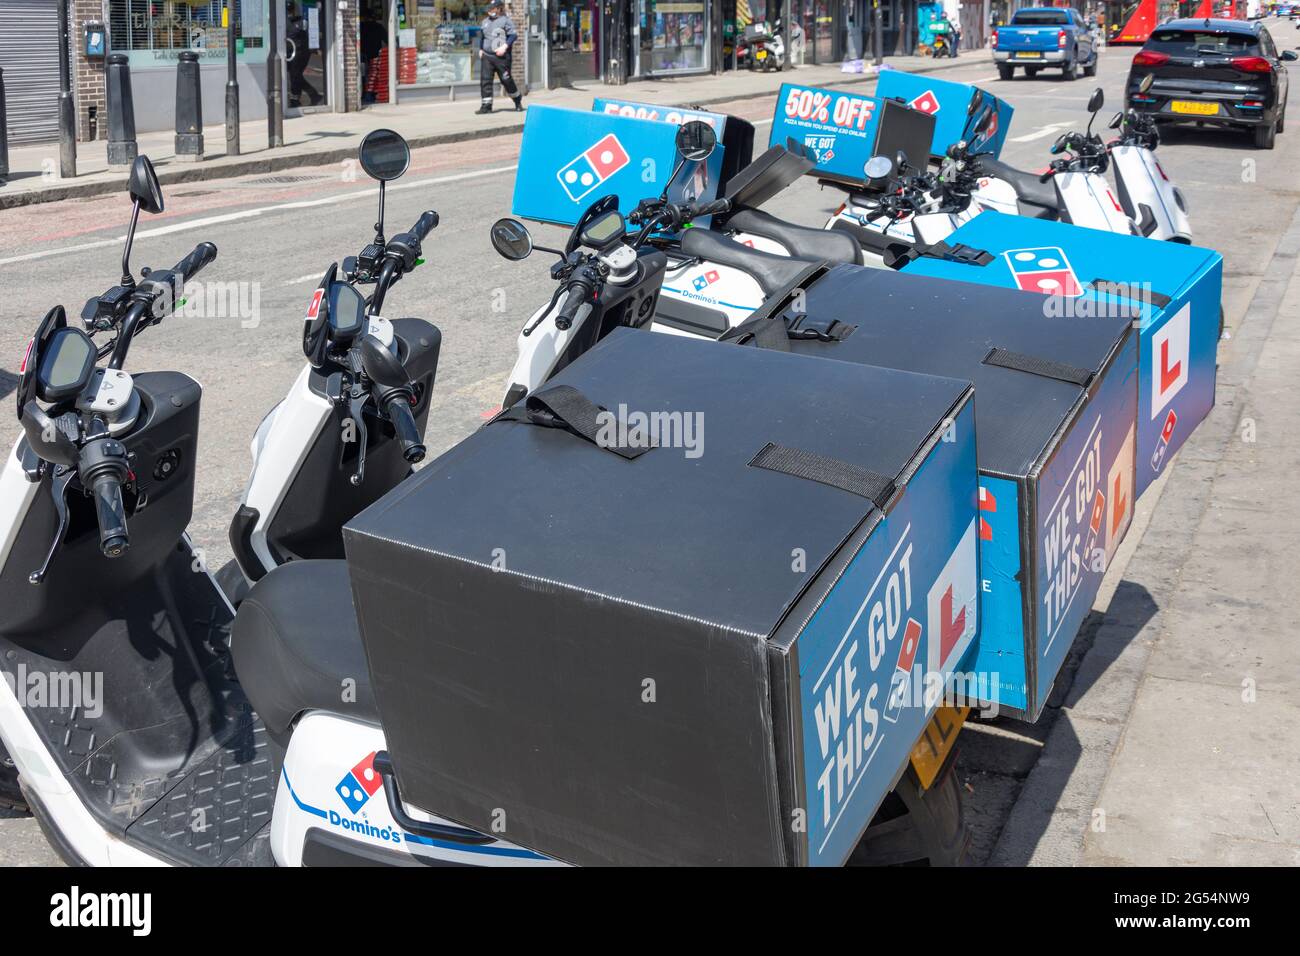 Domino's Pizza delivery scooters, Camden High Street, Camden Town, London Borough of Camden, Greater London, England, United Kingdom Stock Photo